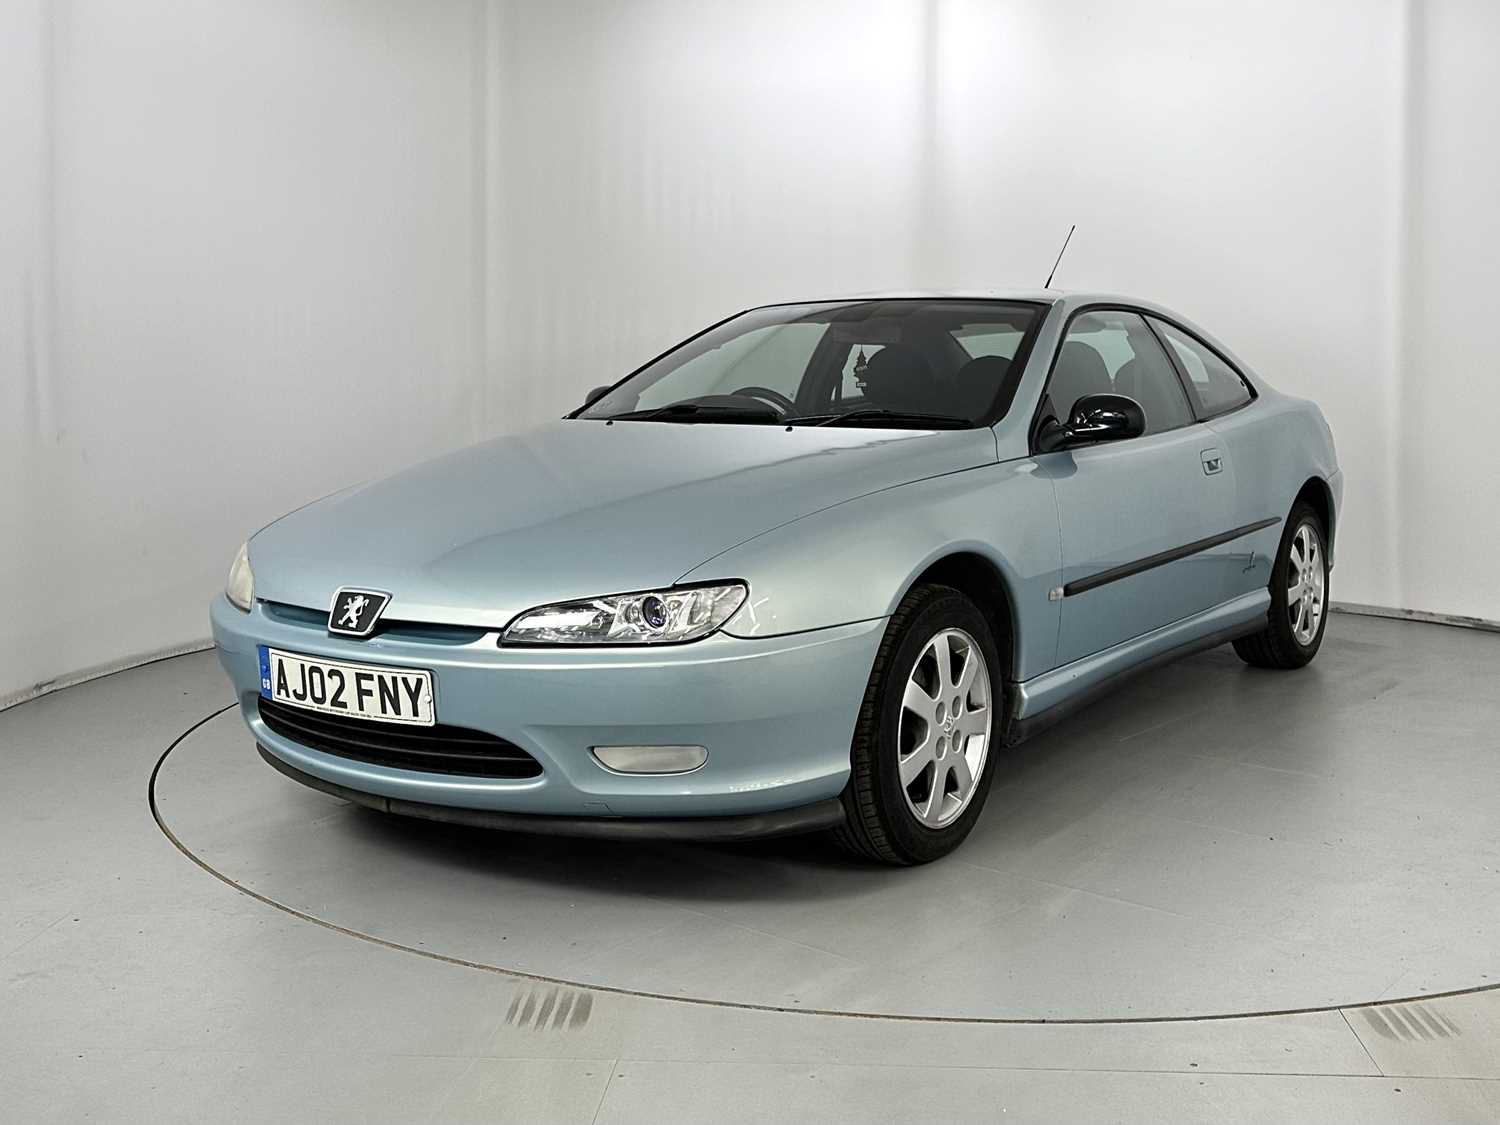 2002 Peugeot 406 Coupe - Image 3 of 28